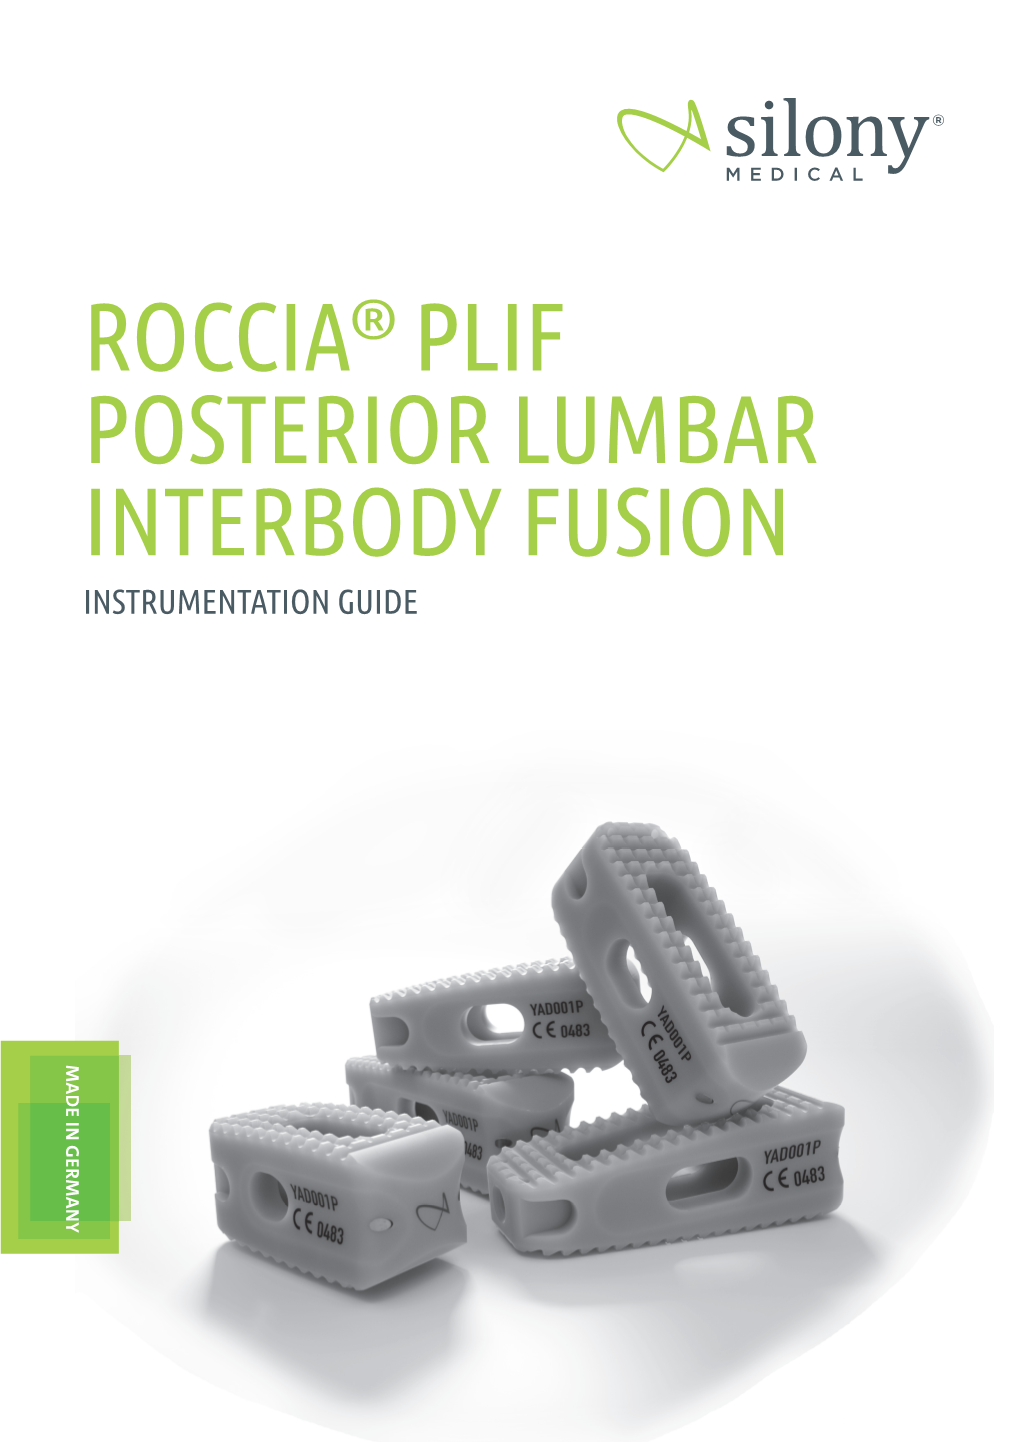 Roccia® Plif Posterior Lumbar Interbody Fusion Instrumentation Guide Made Germany in Table of Contents